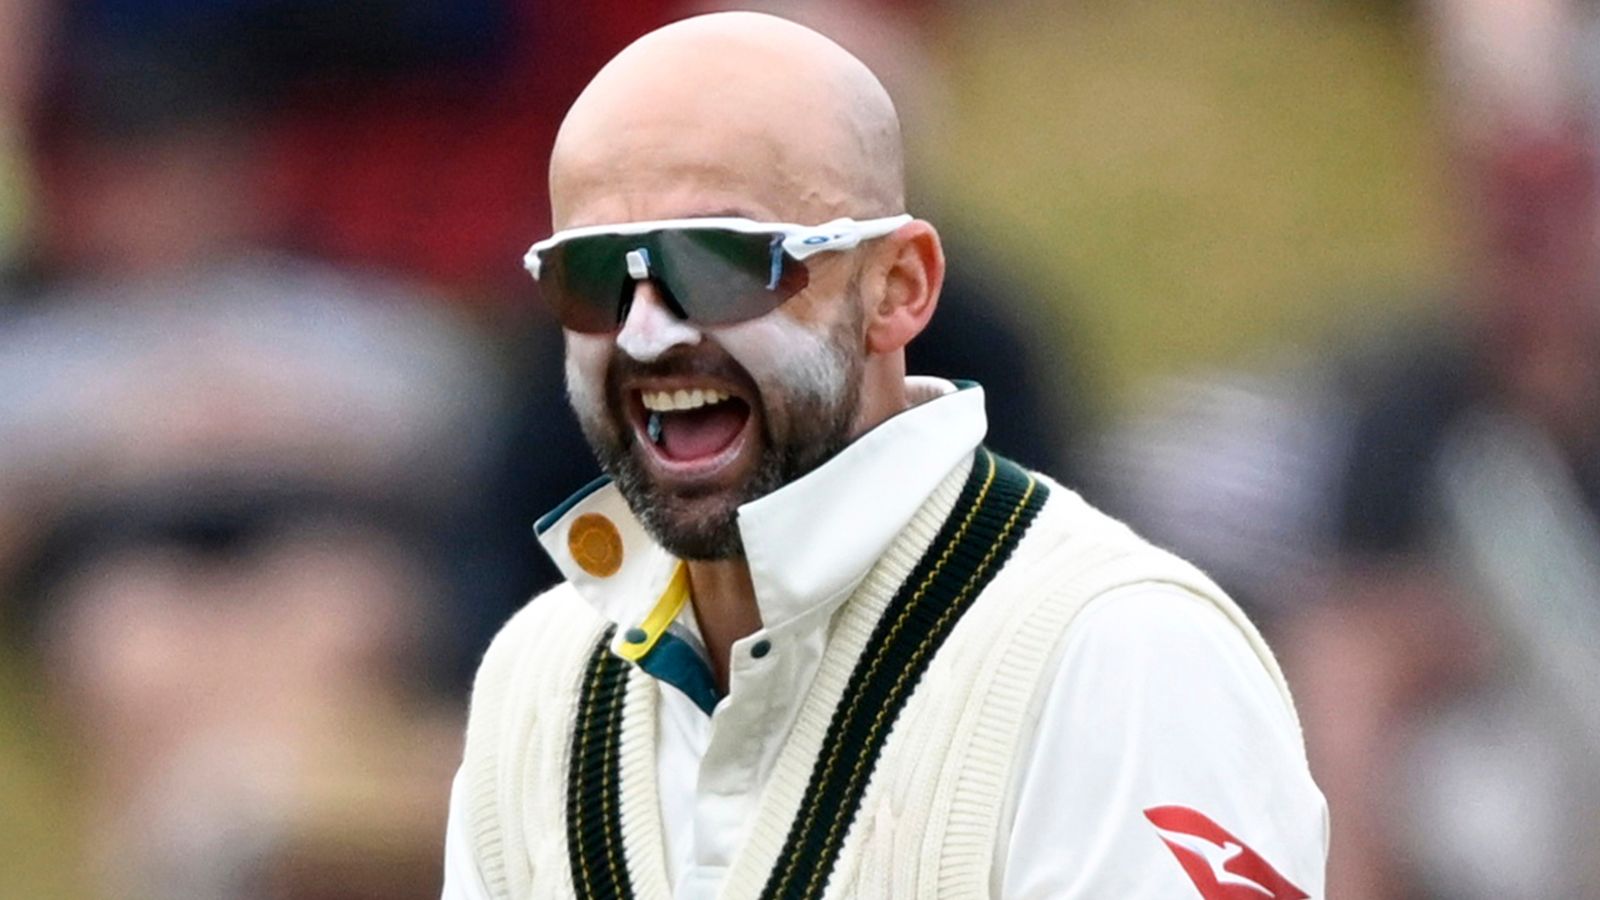 Australia thrash New Zealand by 172 runs in first Test as Nathan Lyon takes 10 wickets in match | Cricket News